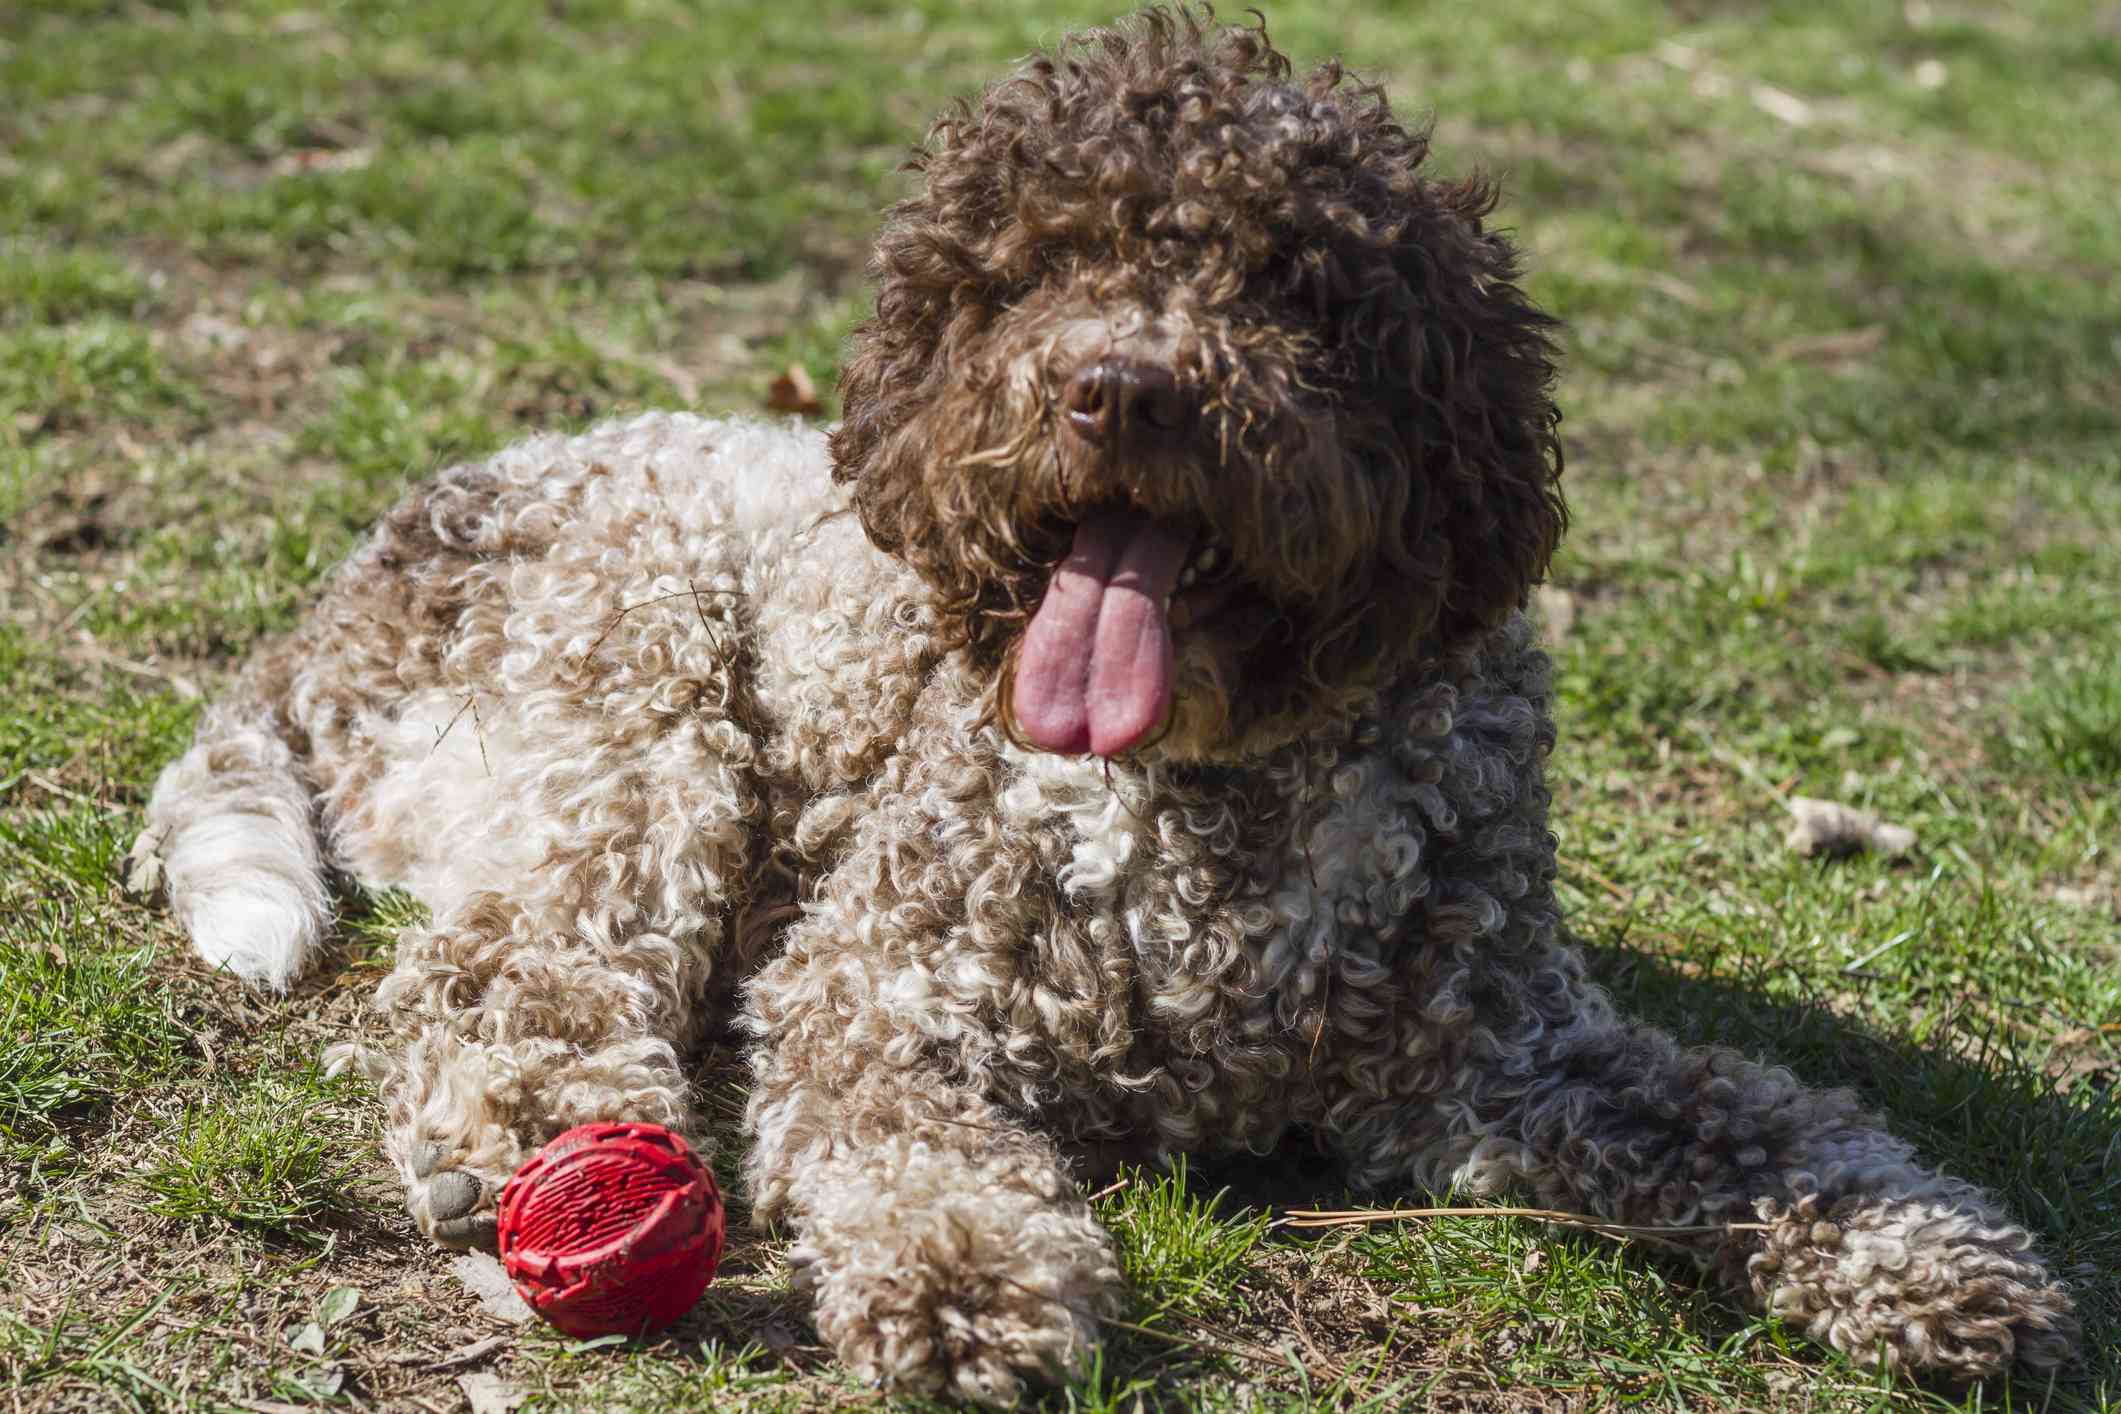 Lagotto Romagnolo lying in grass beside a ball